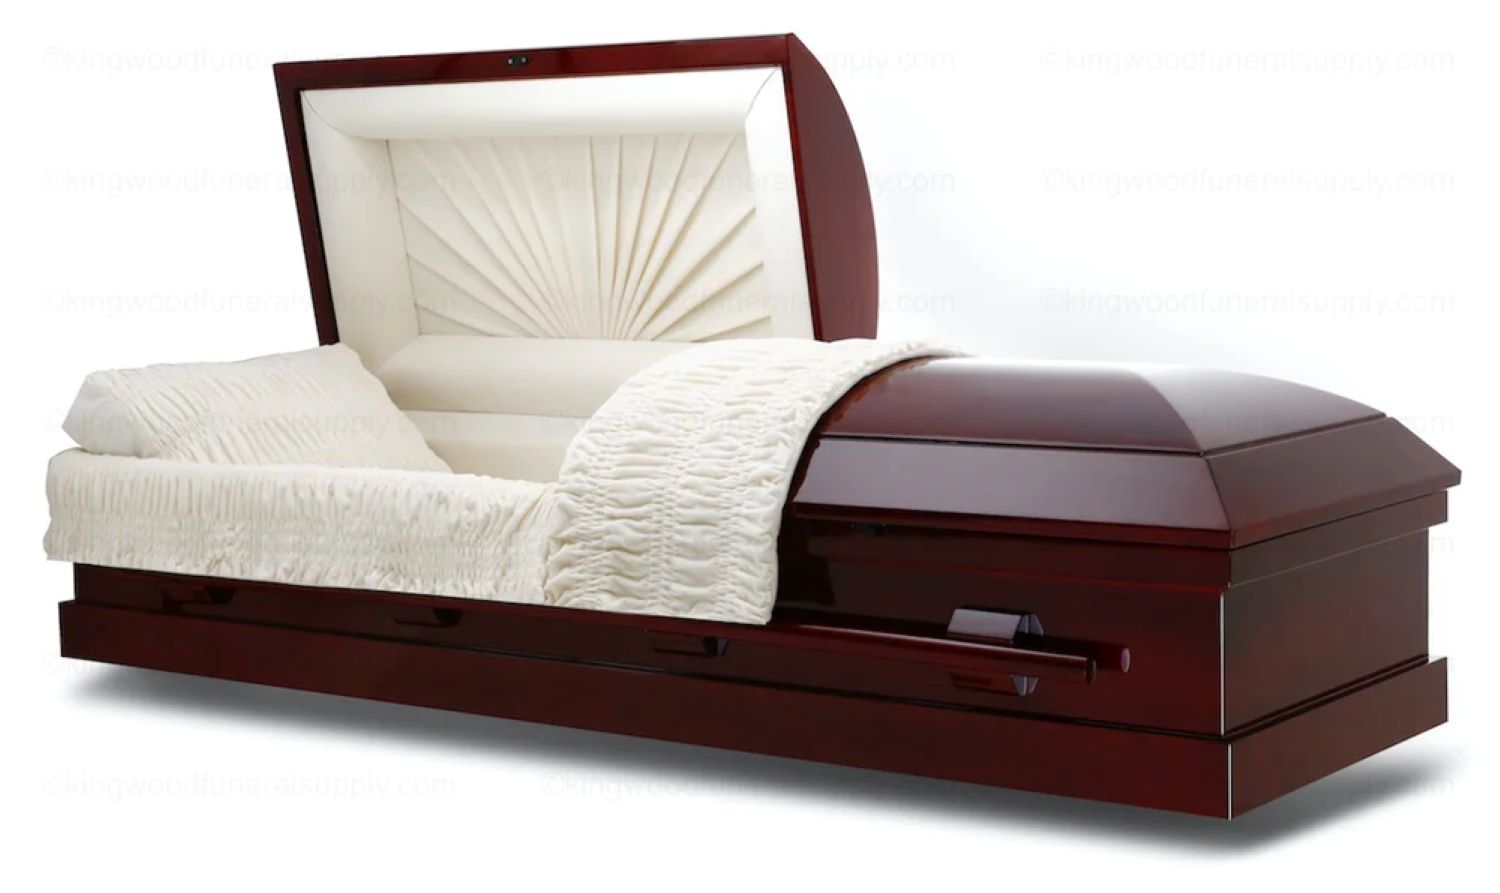 Picture of CLASSIC - Mahogany Veneer Cremation or Burial Casket Casket